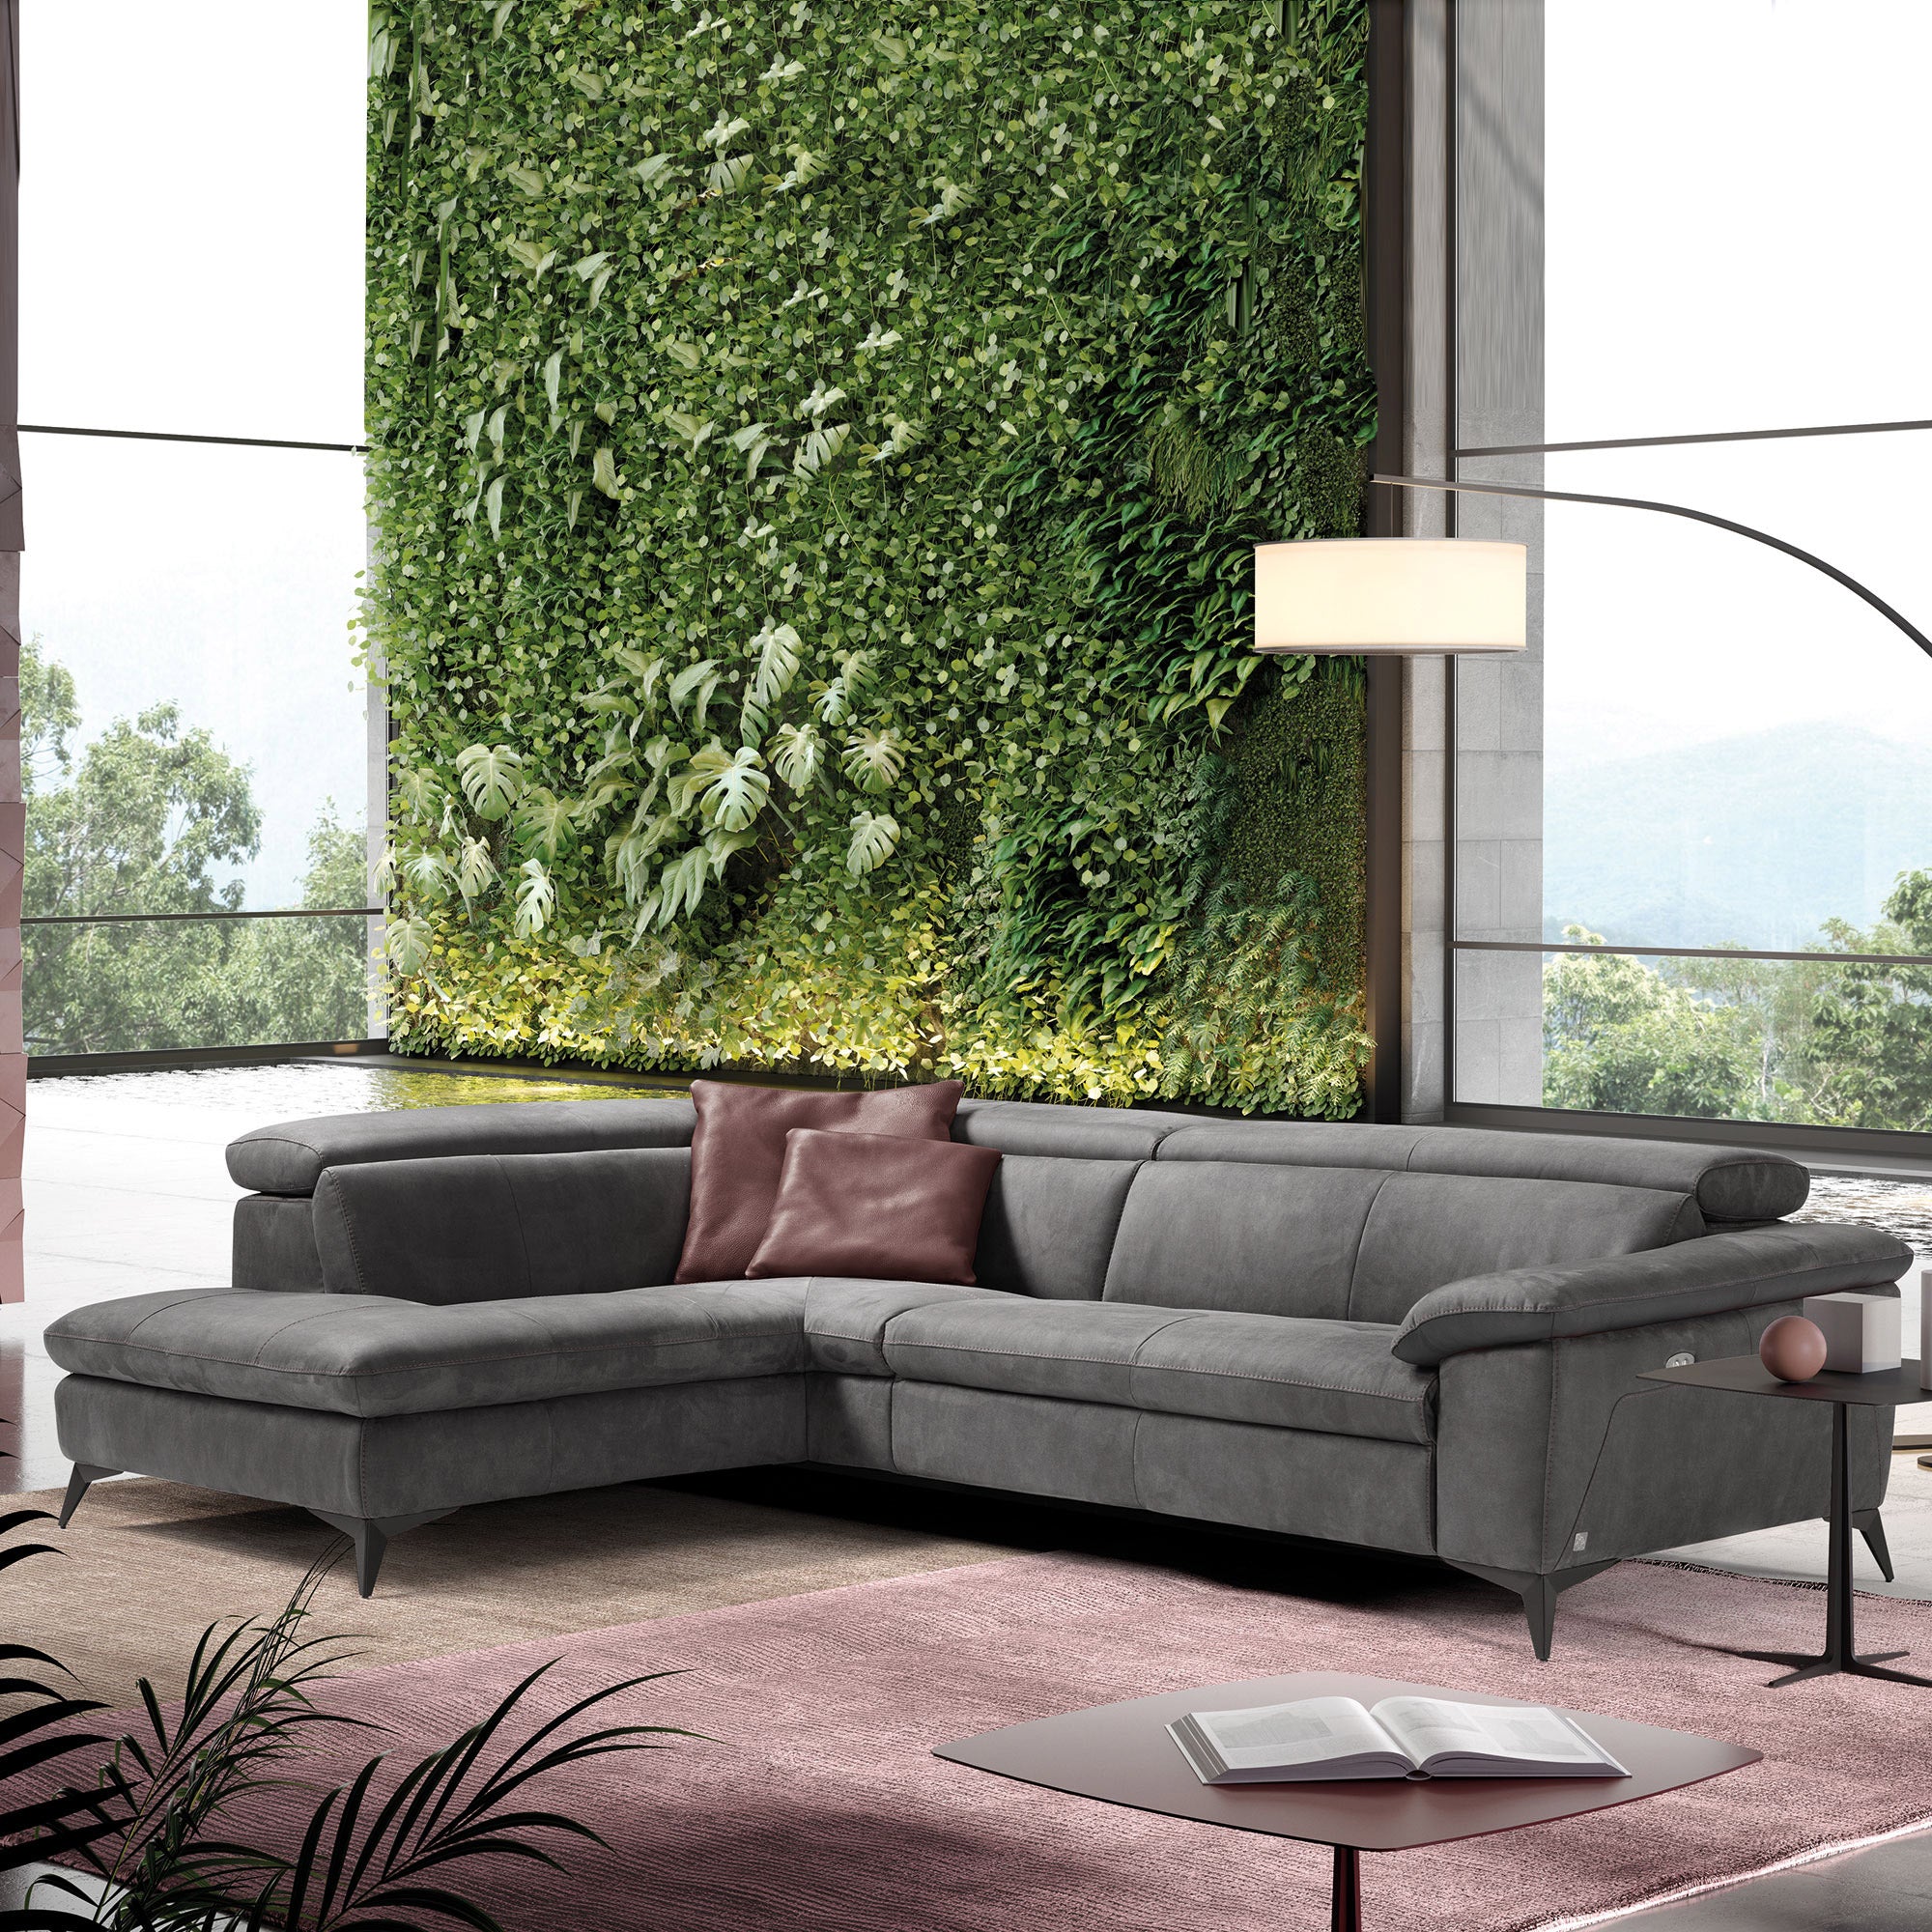 Potenza - 3 Seat Large Sofa In Fabric Or Leather Microfibre